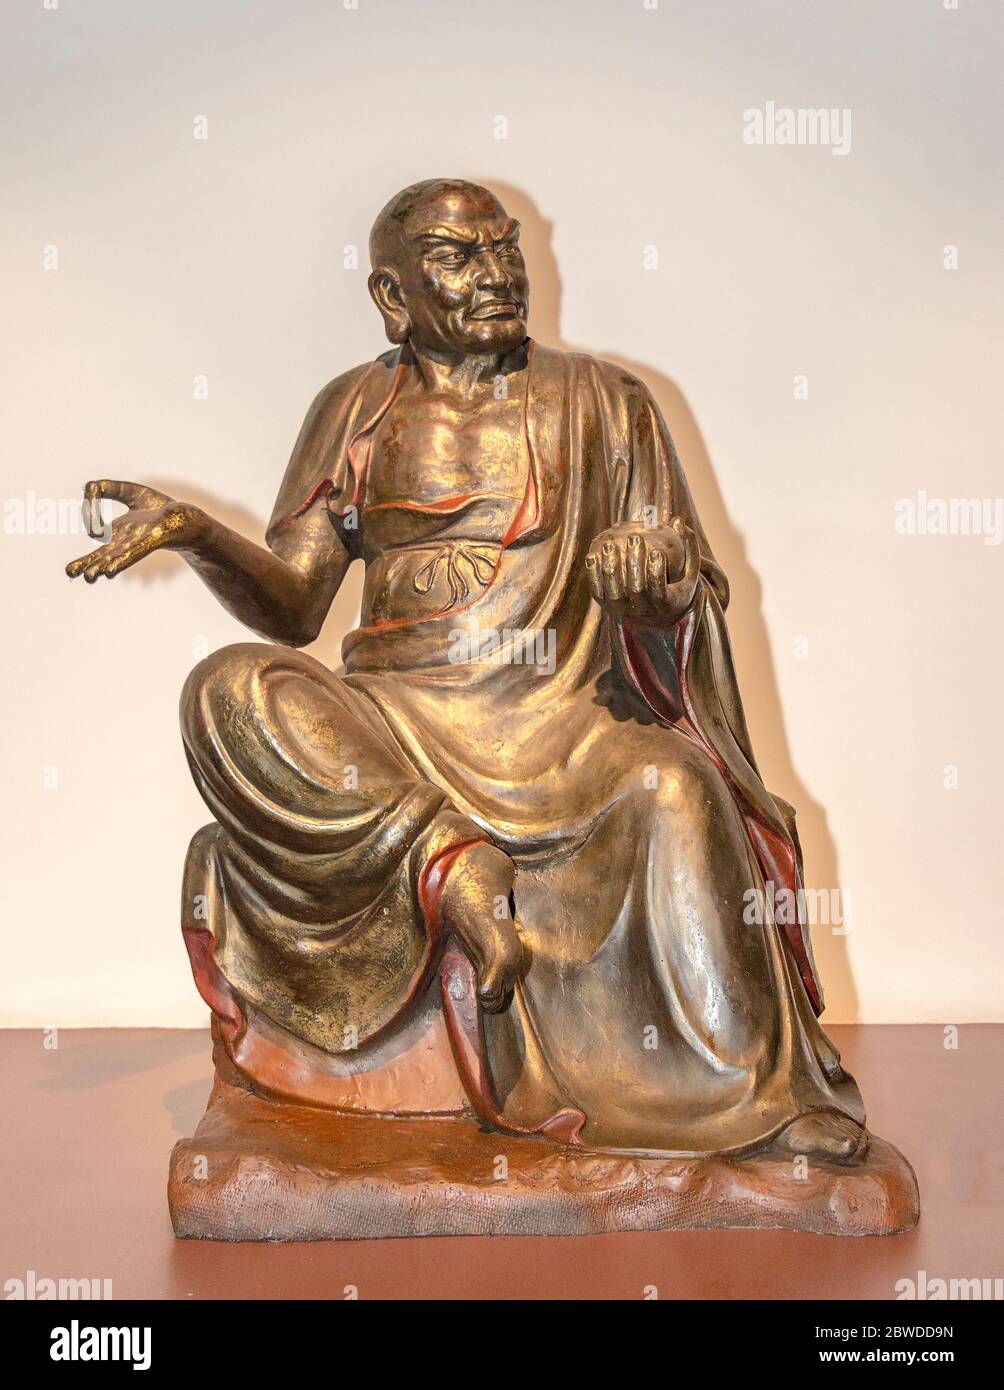 Statue of arhat, in Buddhism someone who has either achieved enlightenment or is working towards it. On disiplay, Zhen Qi Hui Art Center in Hangzhou Stock Photo